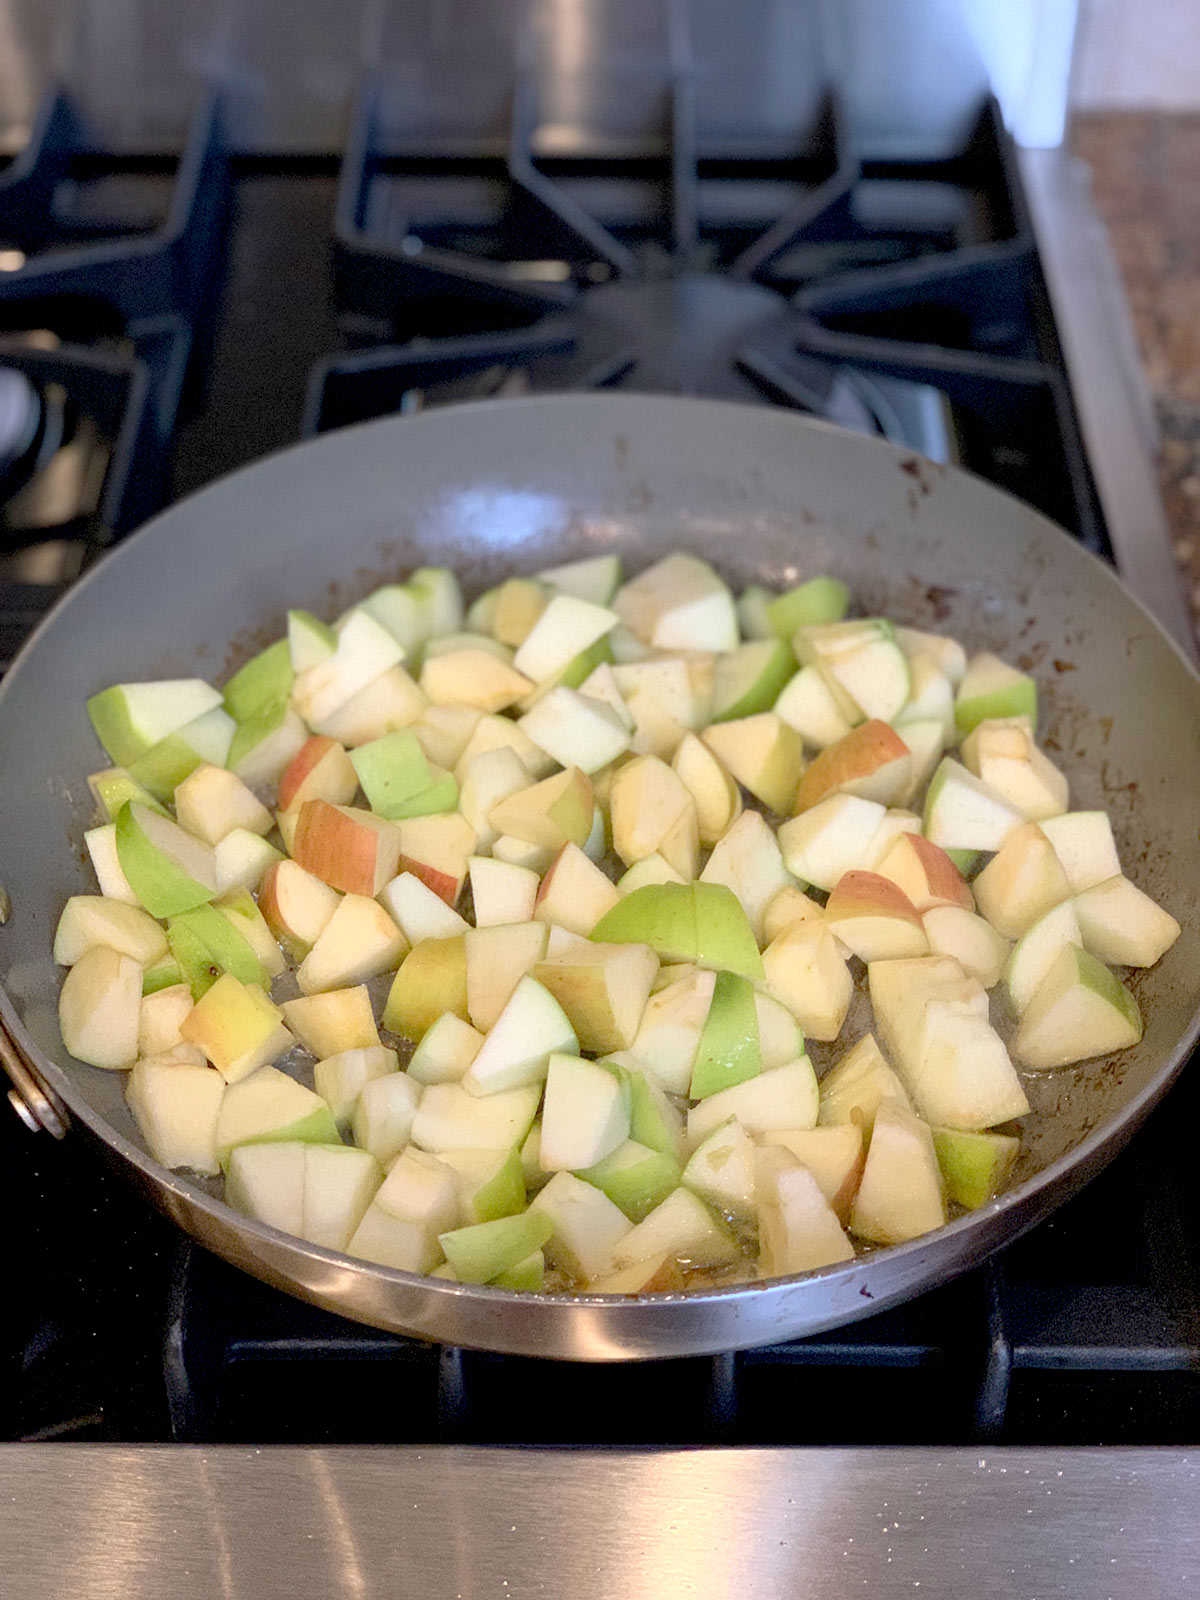 Sauteed apples in pan on stove top.